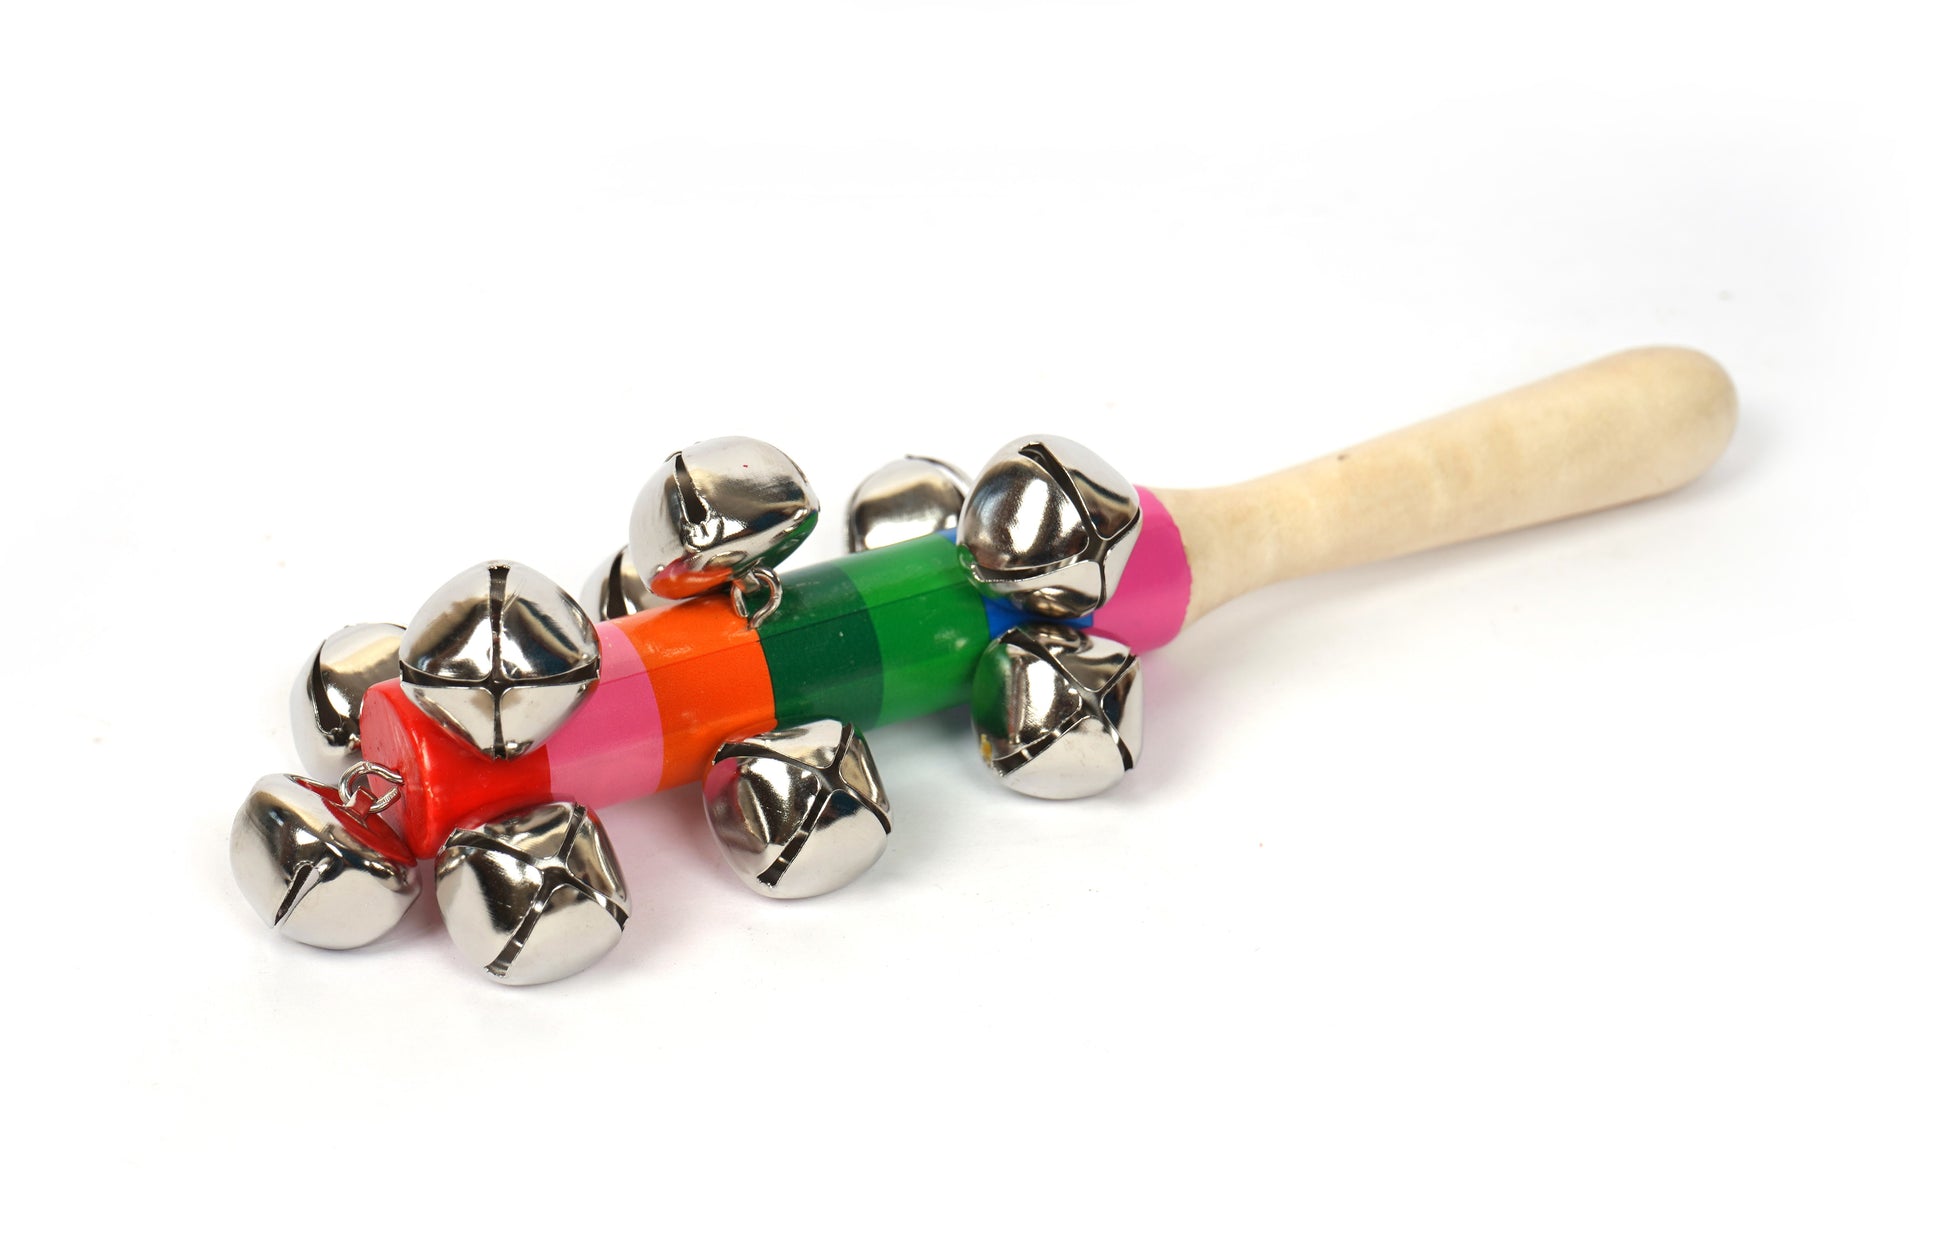 Wooden Rattle with Six colorful wooden cups in rainbow colors stacked on a wooden dowel on a white background. This classic children's toy helps toddlers develop motor skills, hand-eye coordination, and color recognition. 